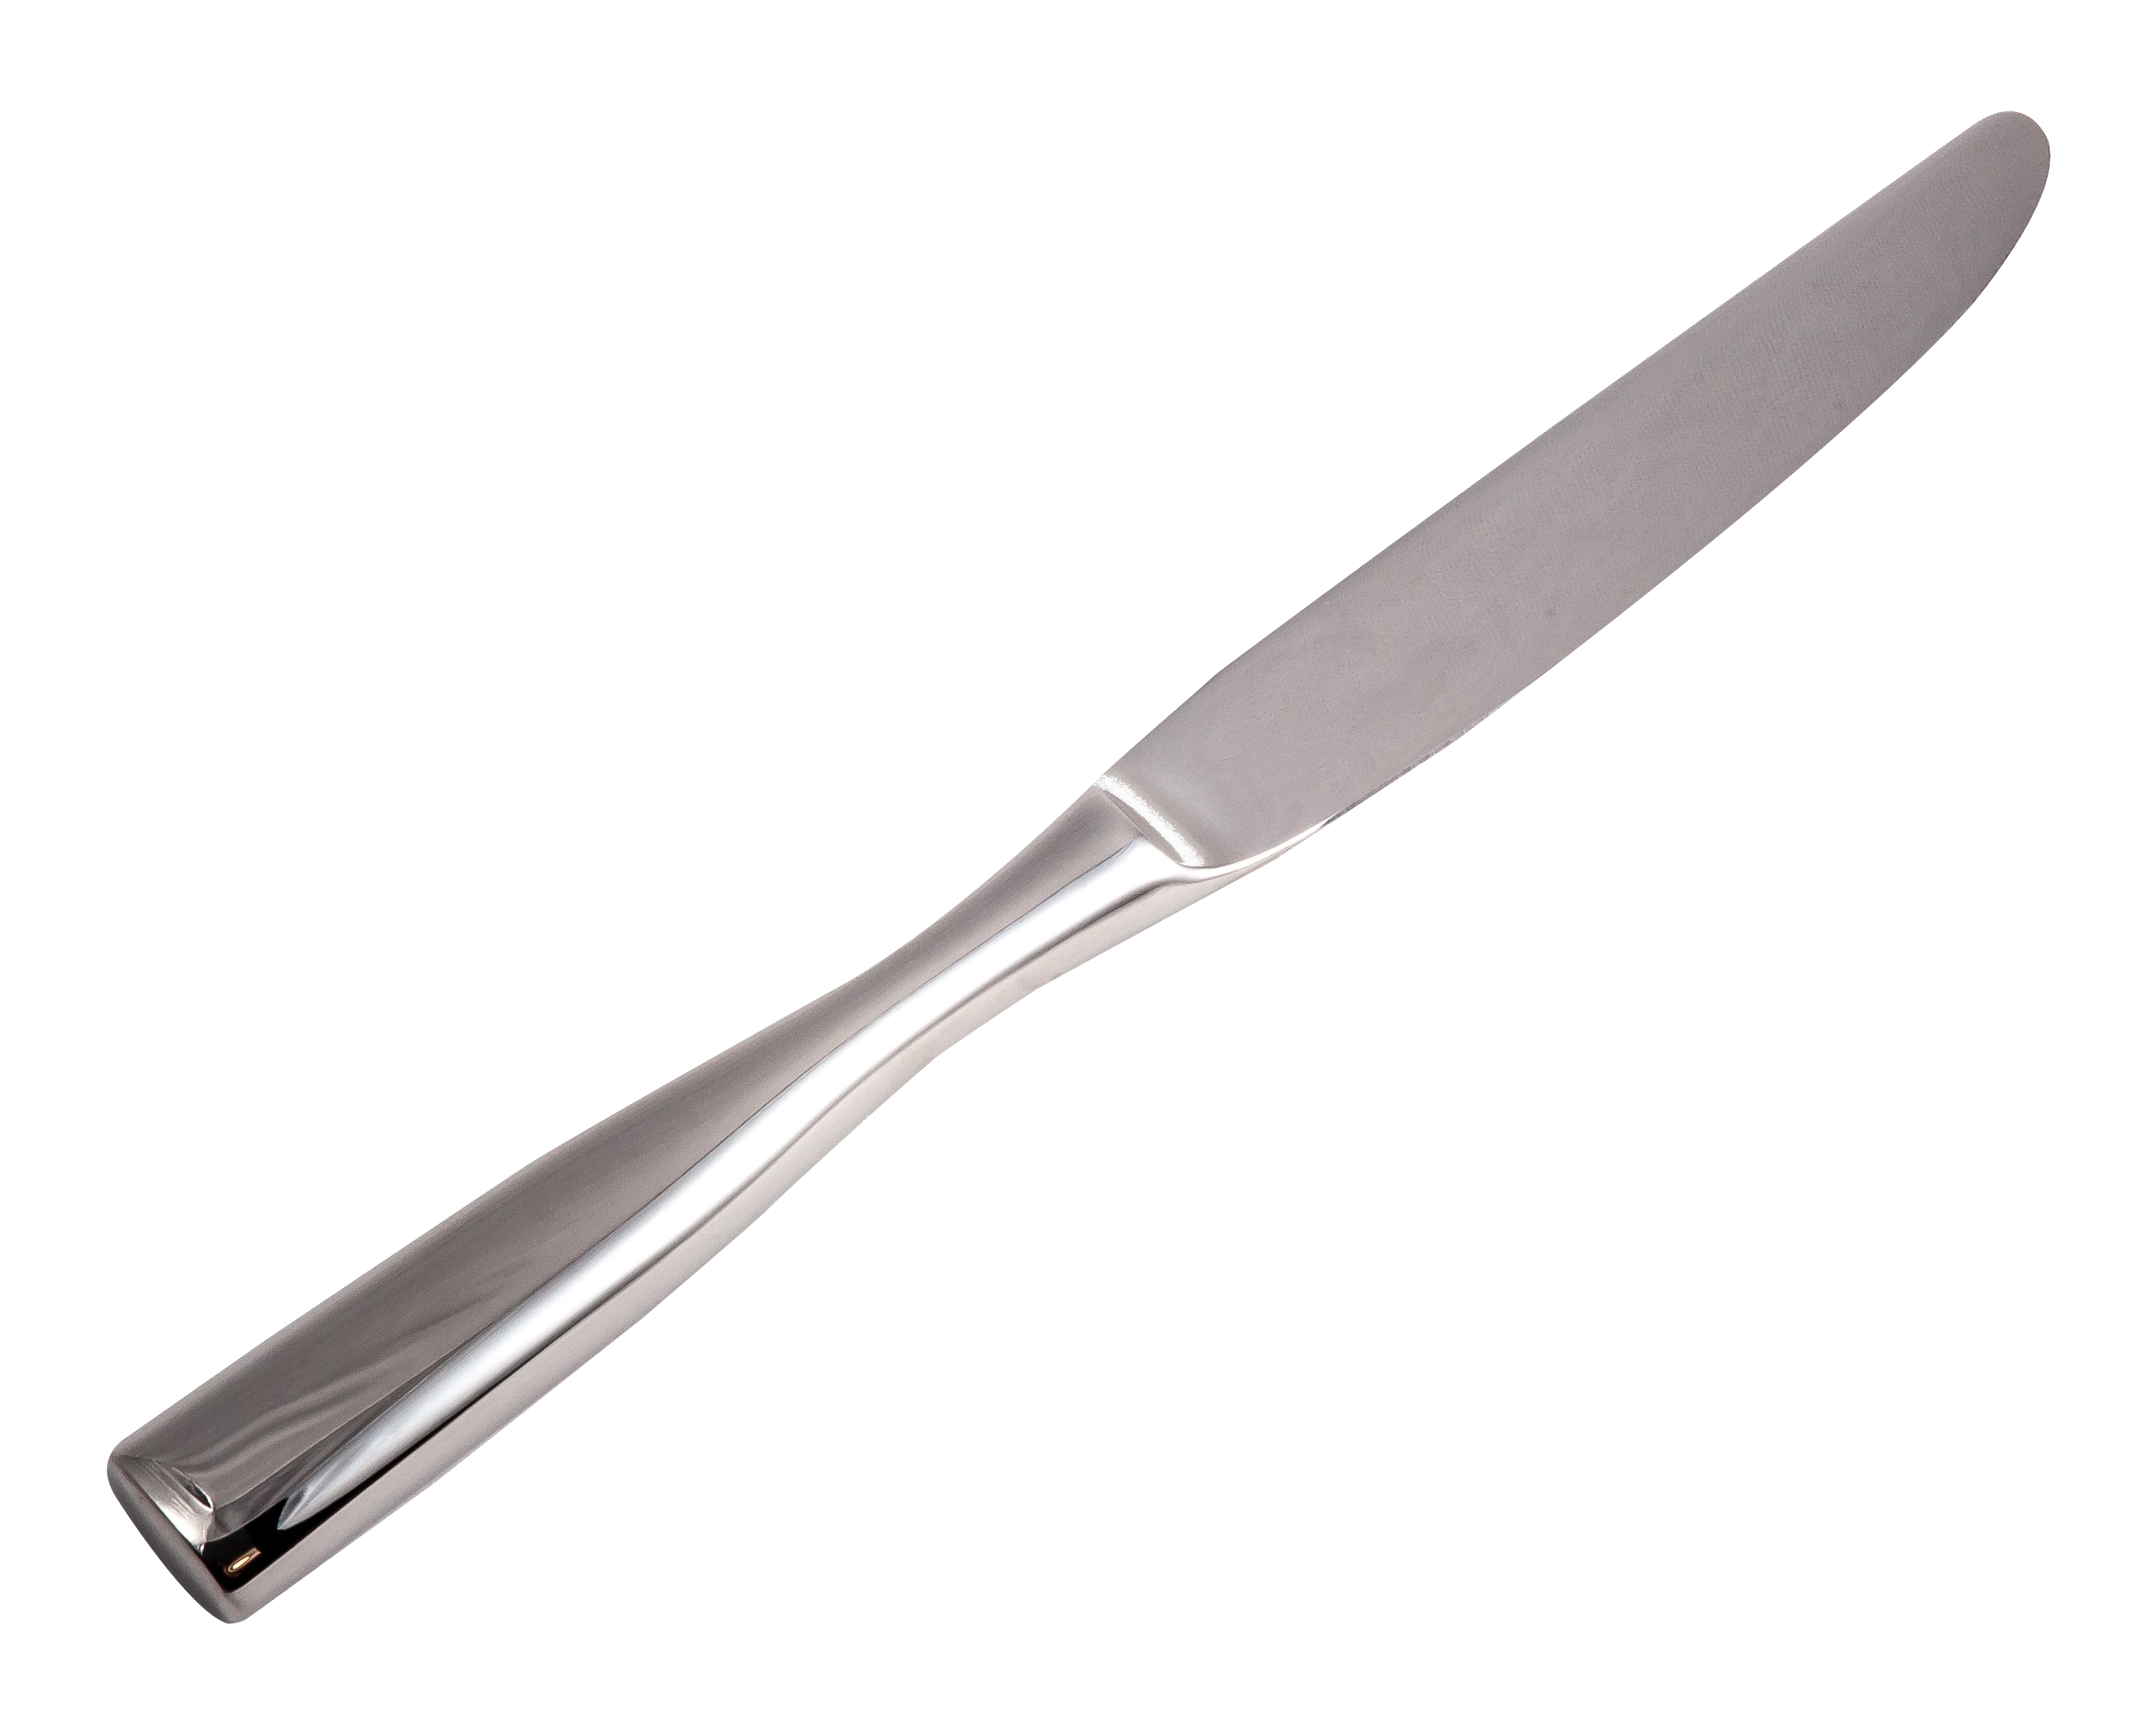 Steel Butter Knife Photos Free Photo PNG Image